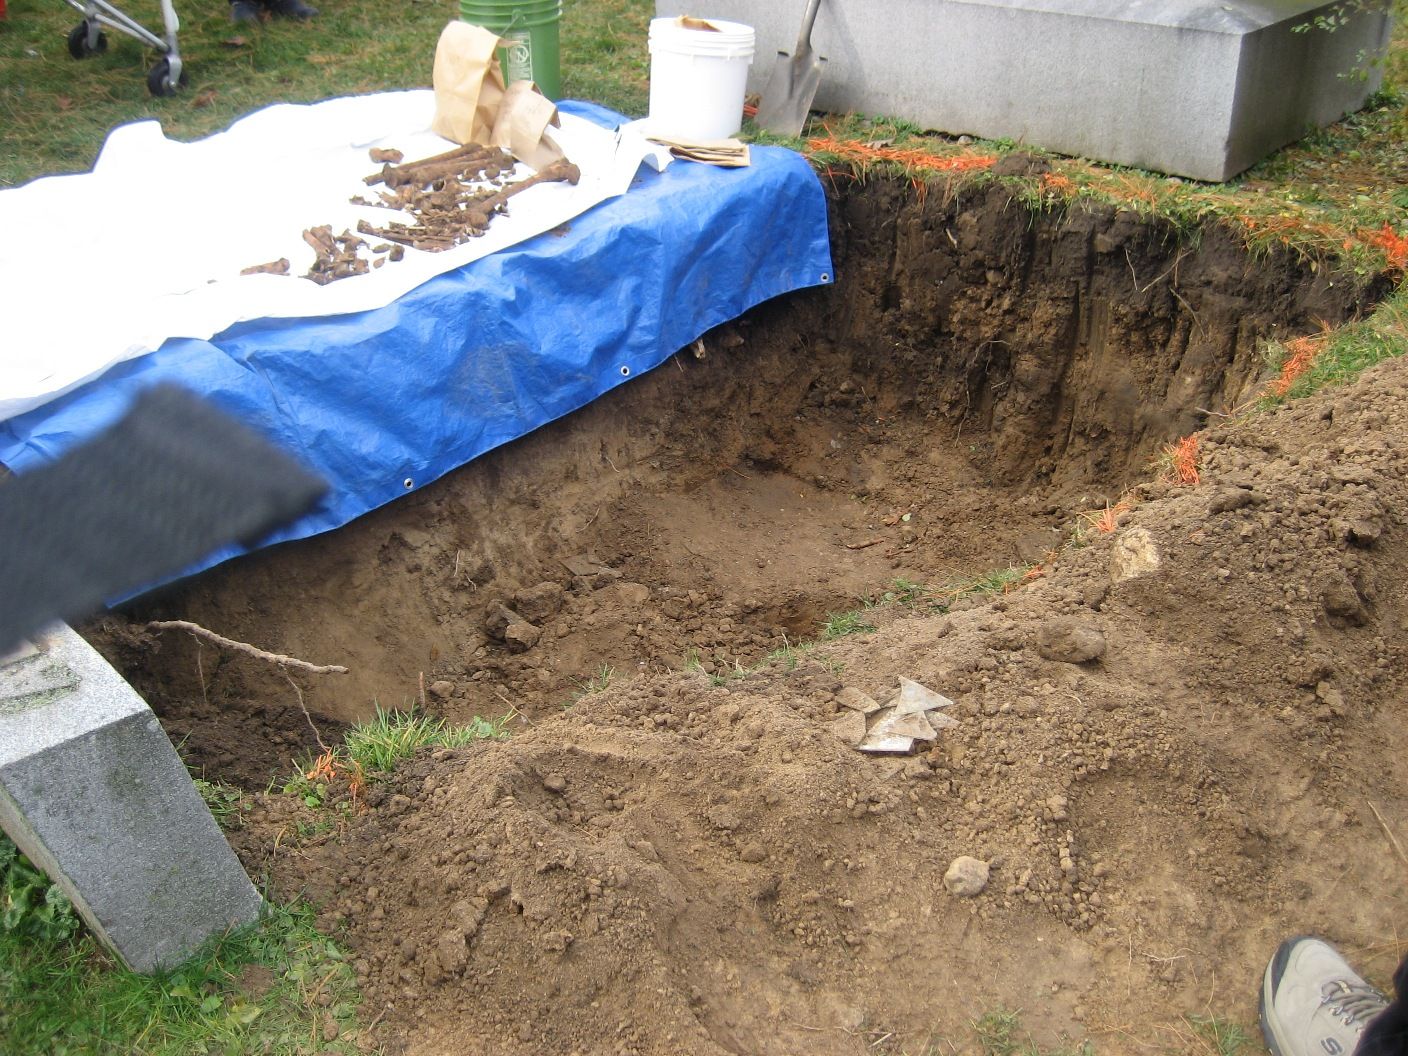 Her skeletal remains were found in a shallow grave. 